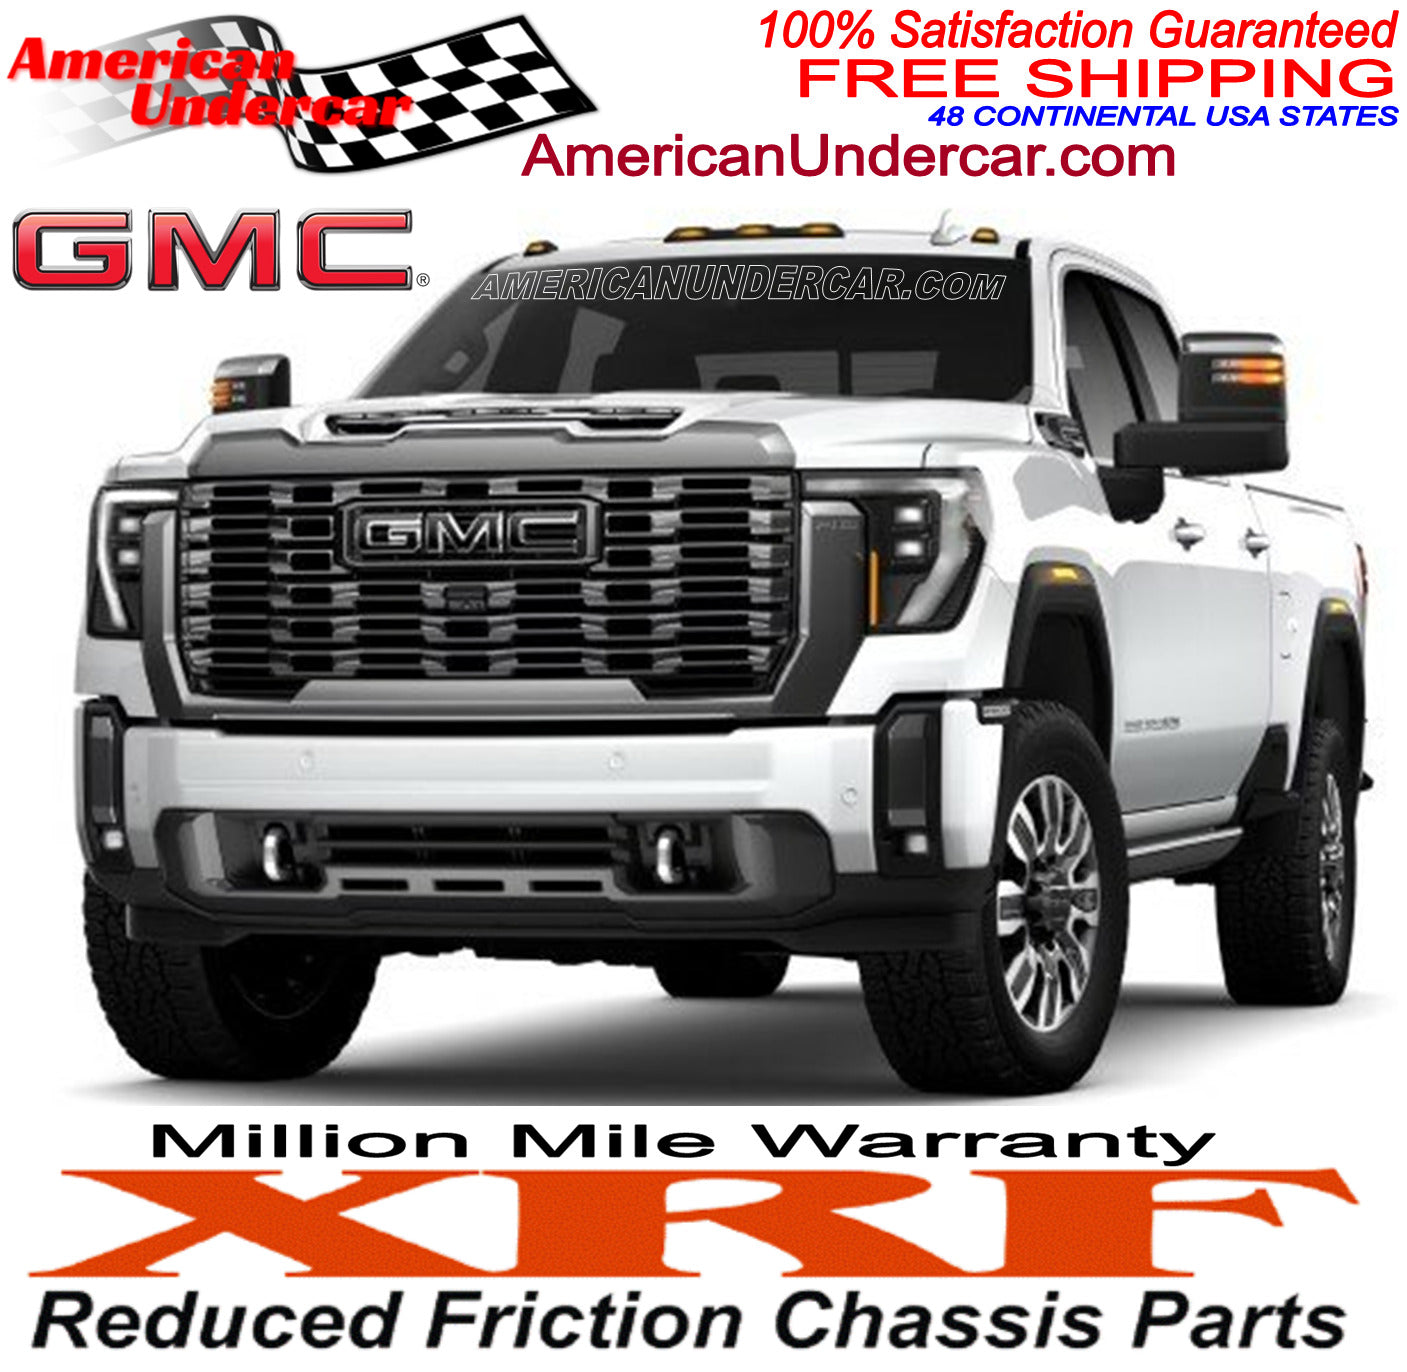 XRF Steering and Suspension Kit for 2011-2019 GMC Sierra 2500HD 4x4